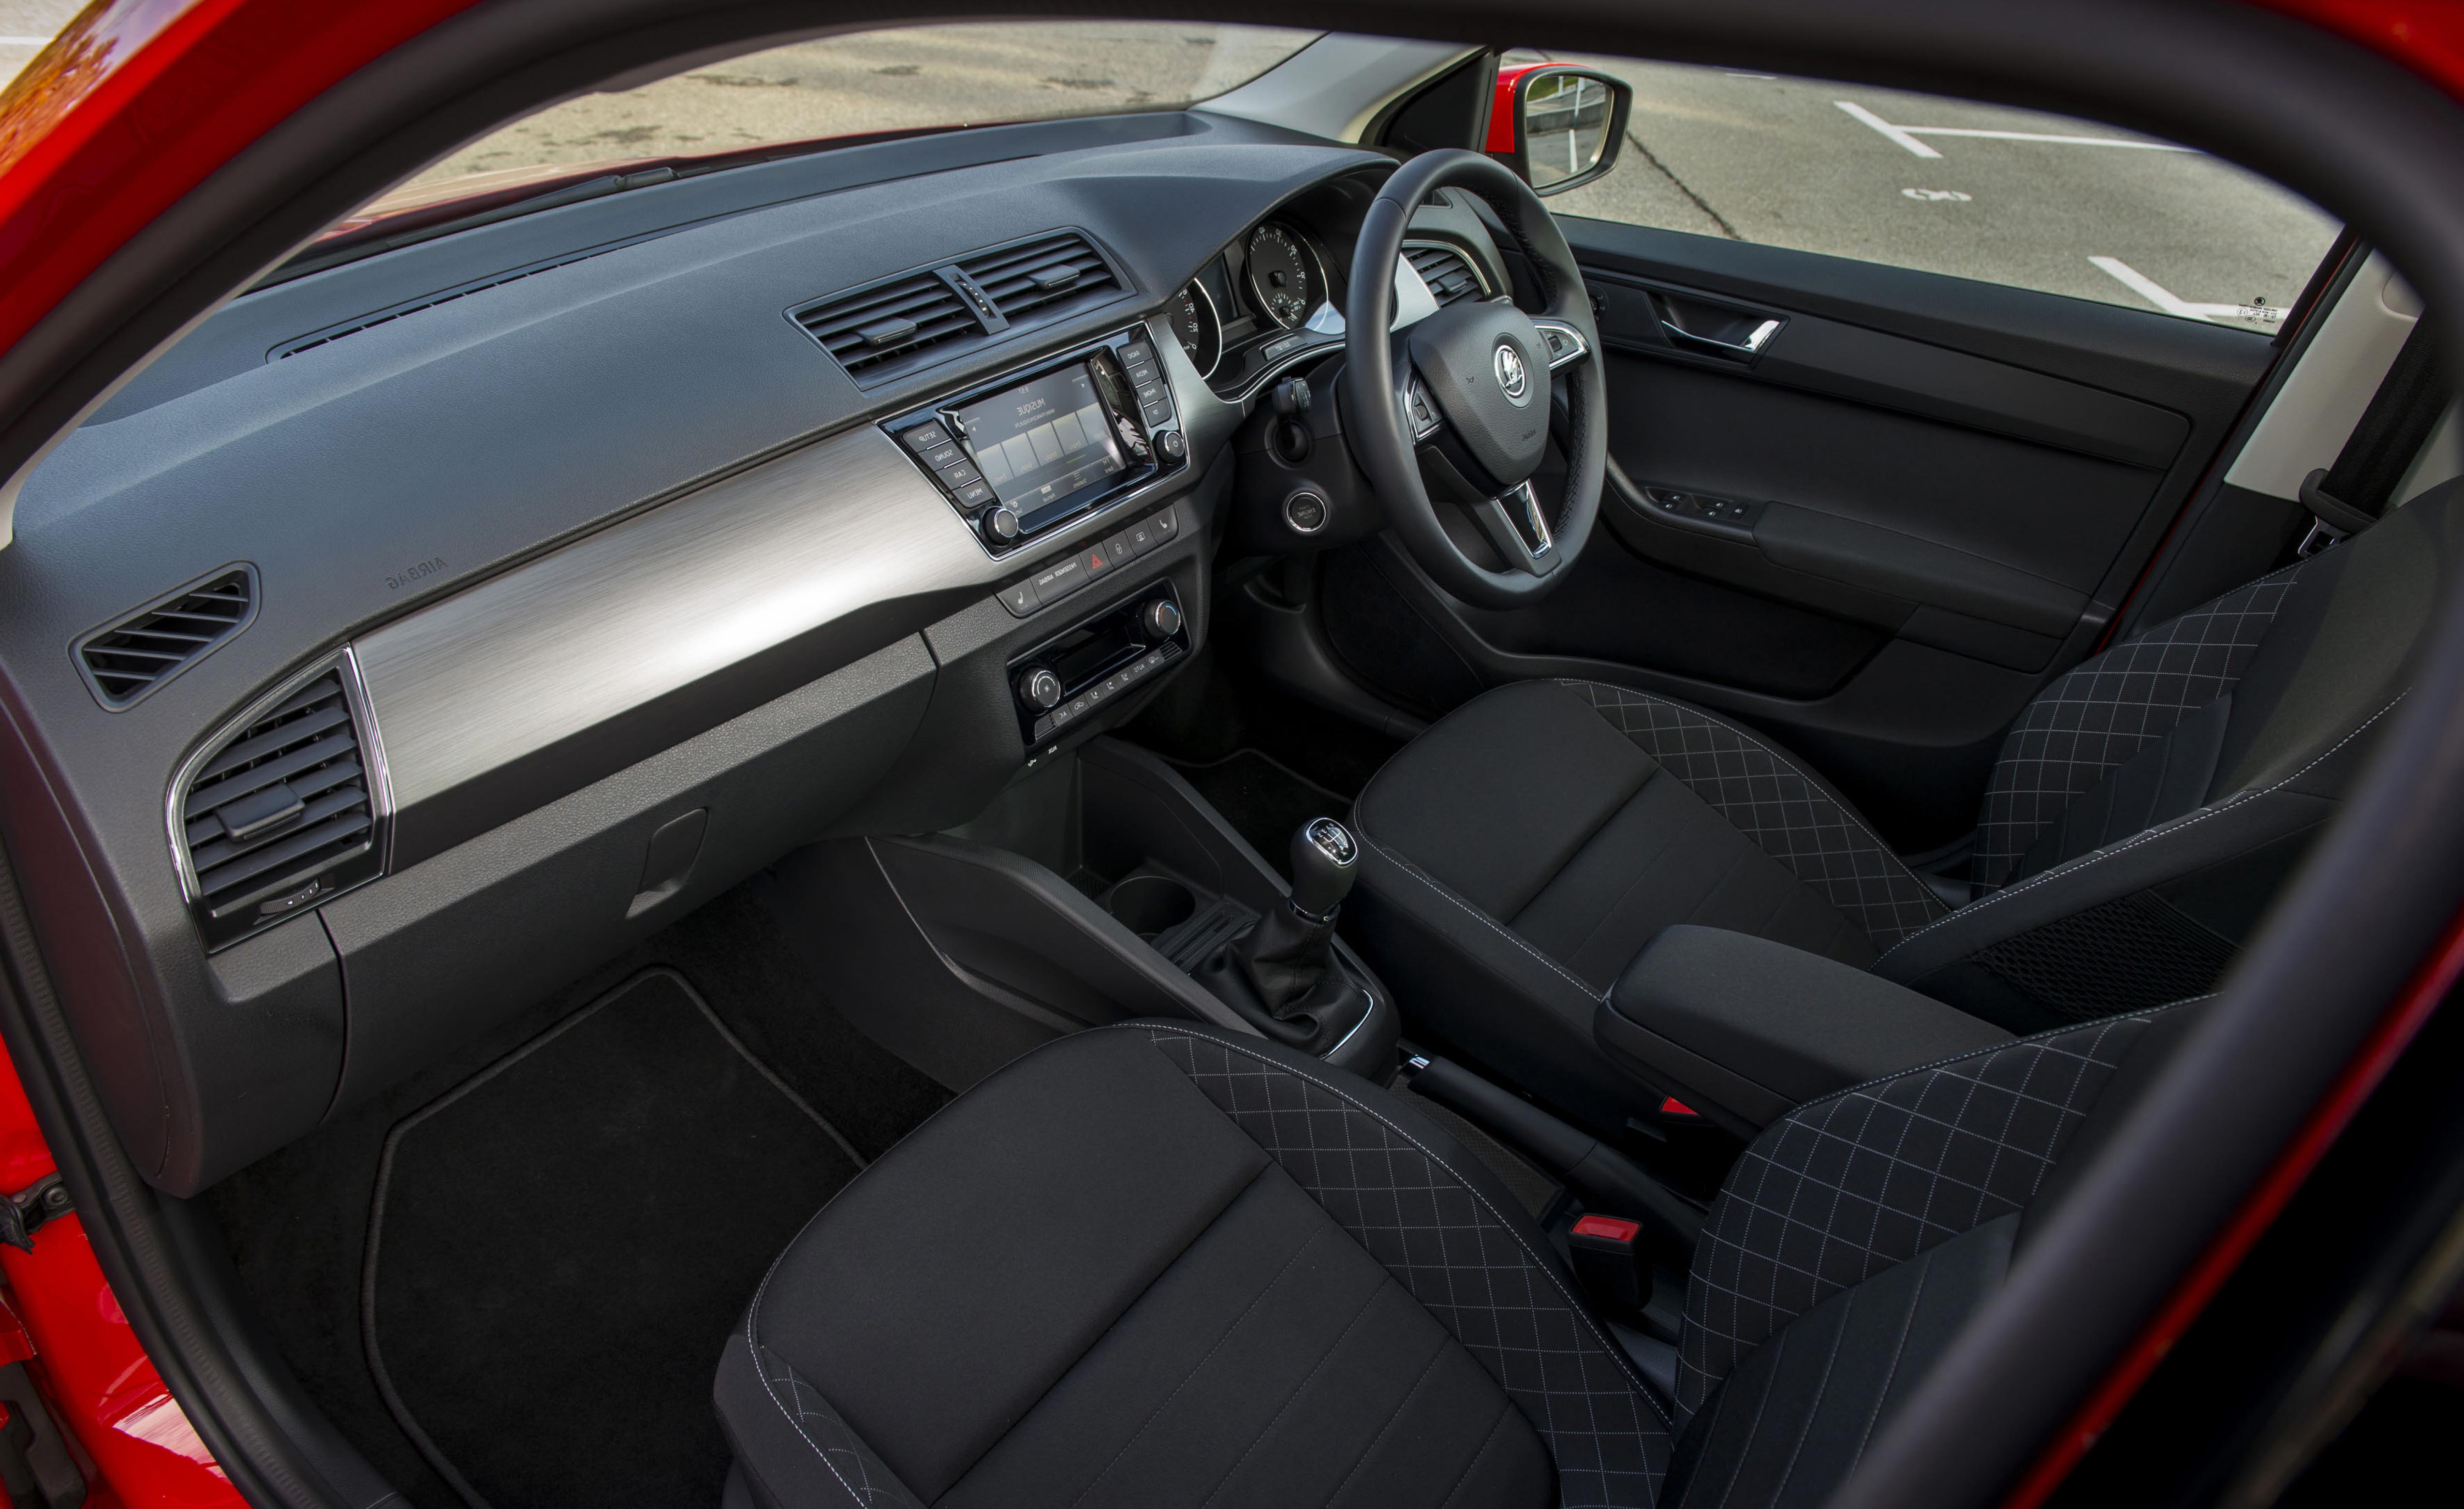 One of the few criticisms you could level at the Fabia is that its interior is not very high in quality